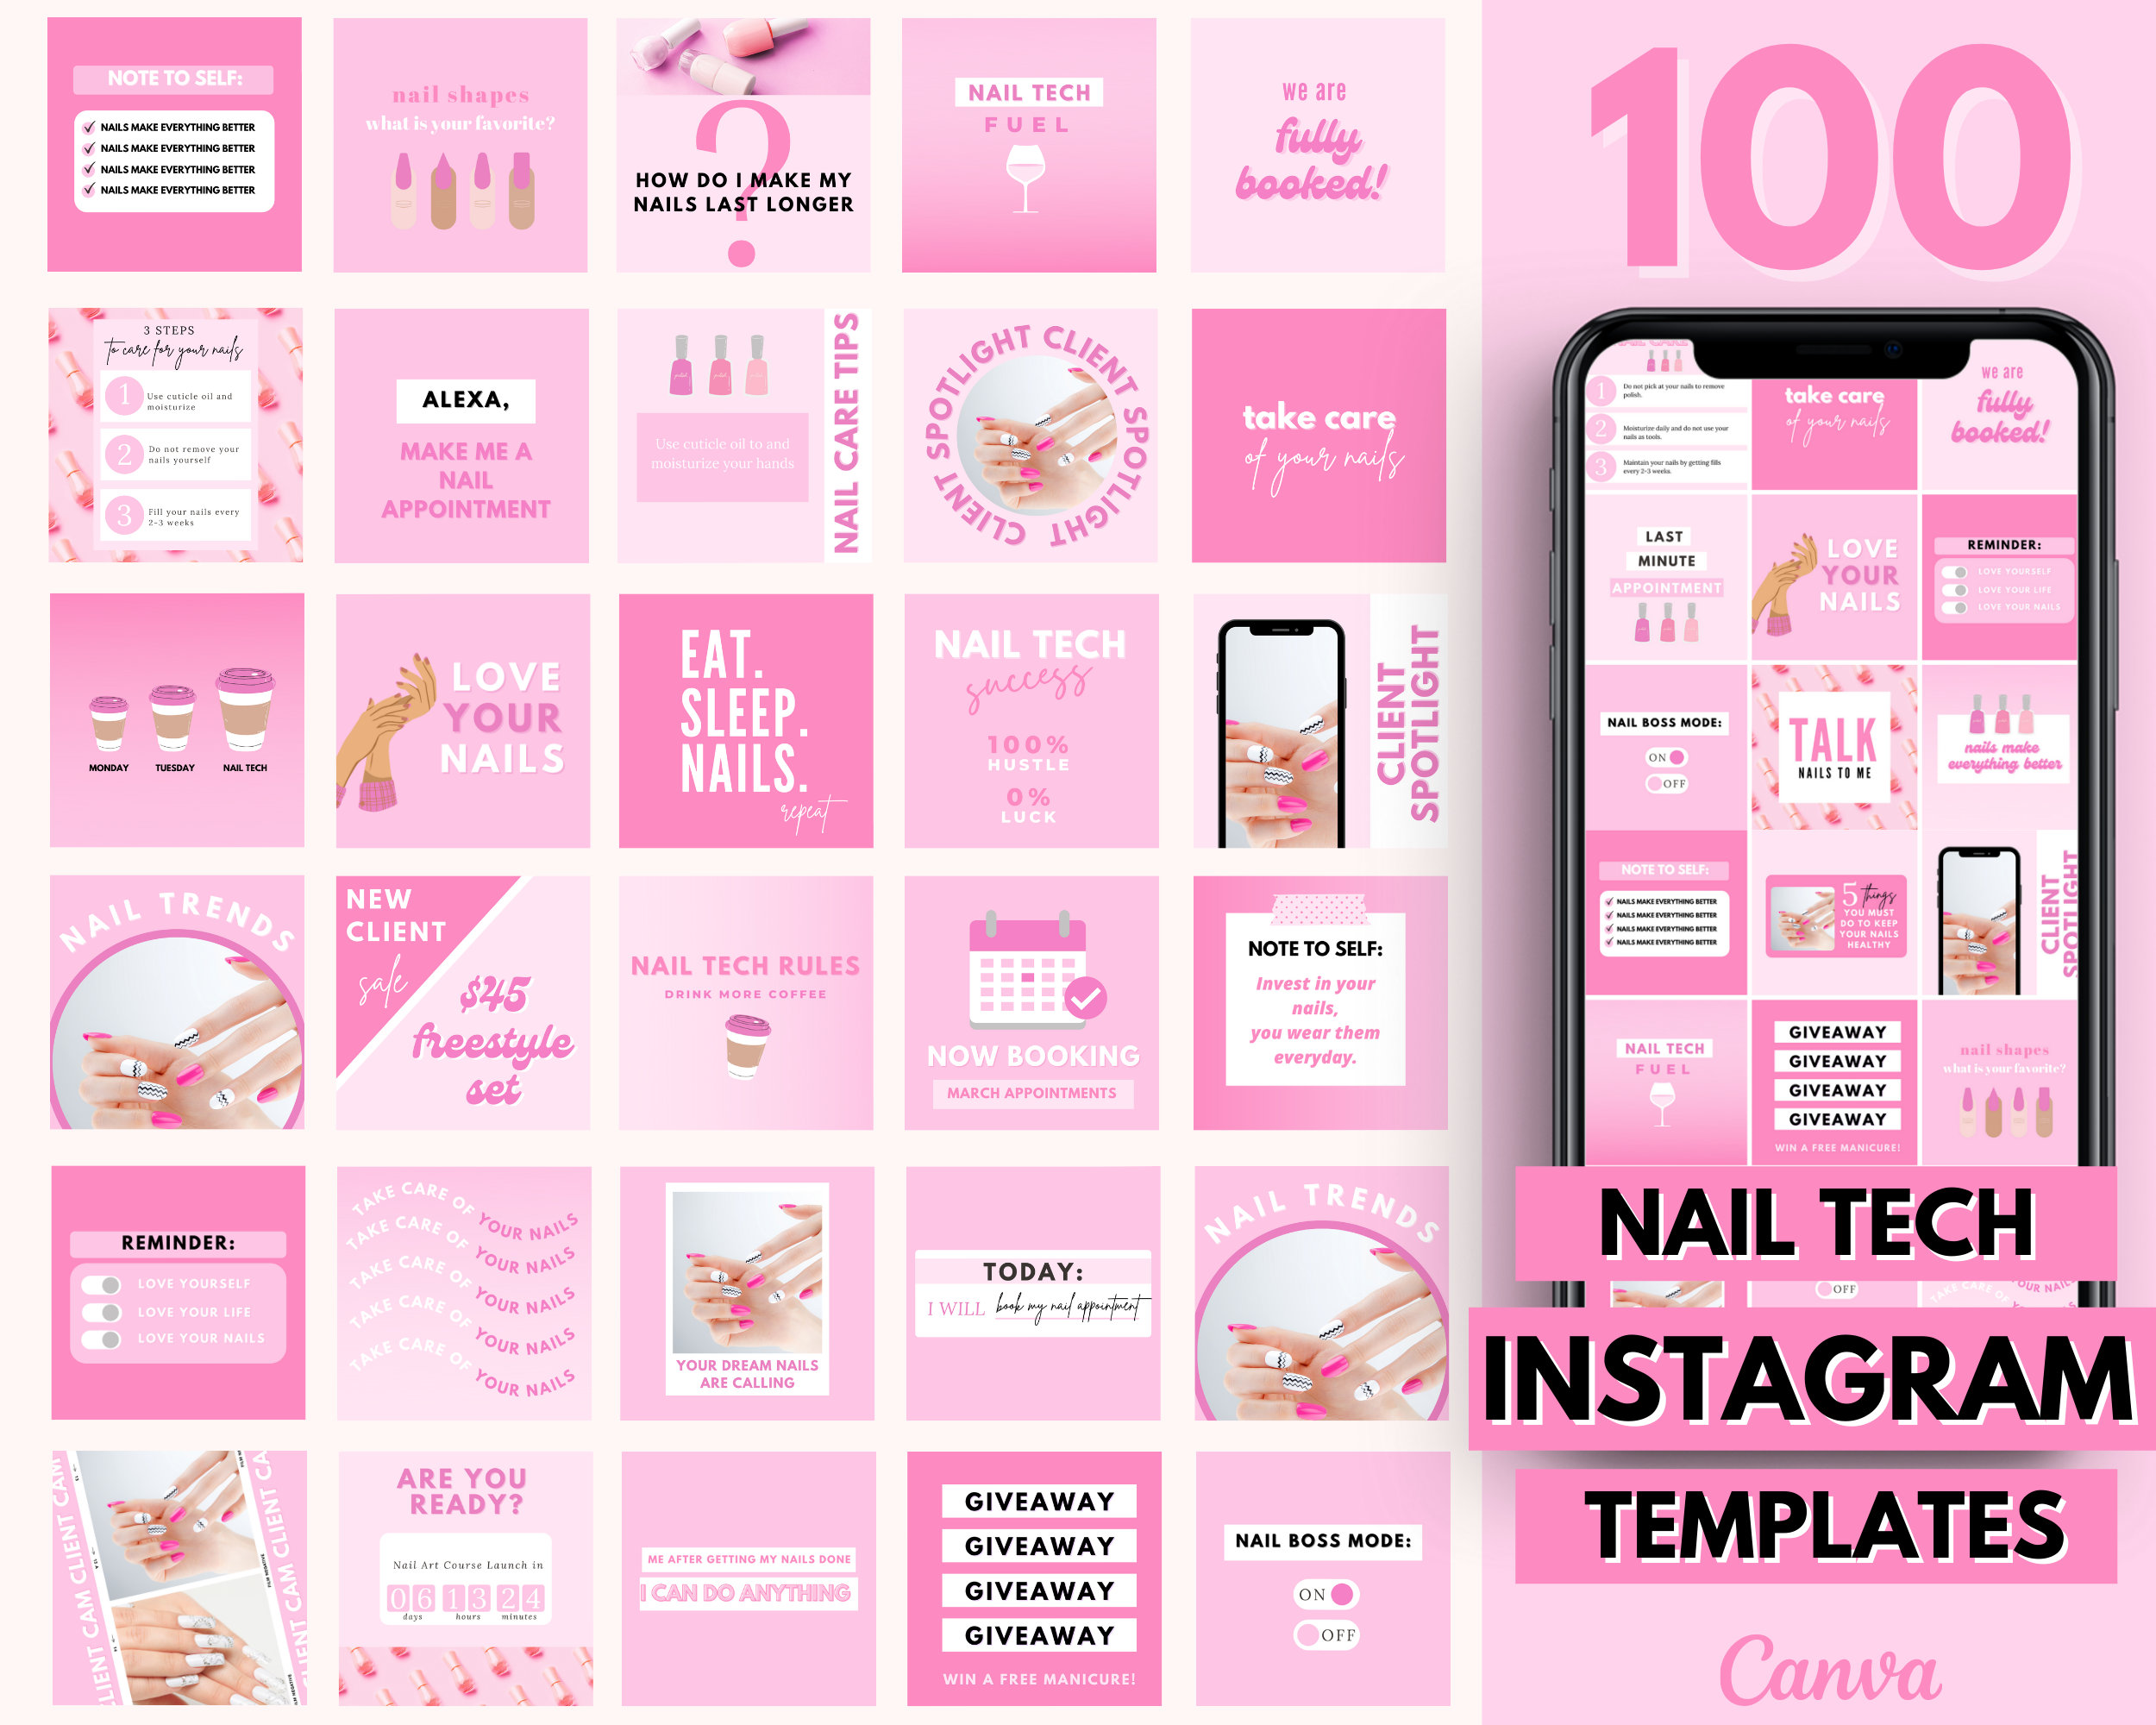 3. Best Nail Design Accounts on Instagram - wide 5